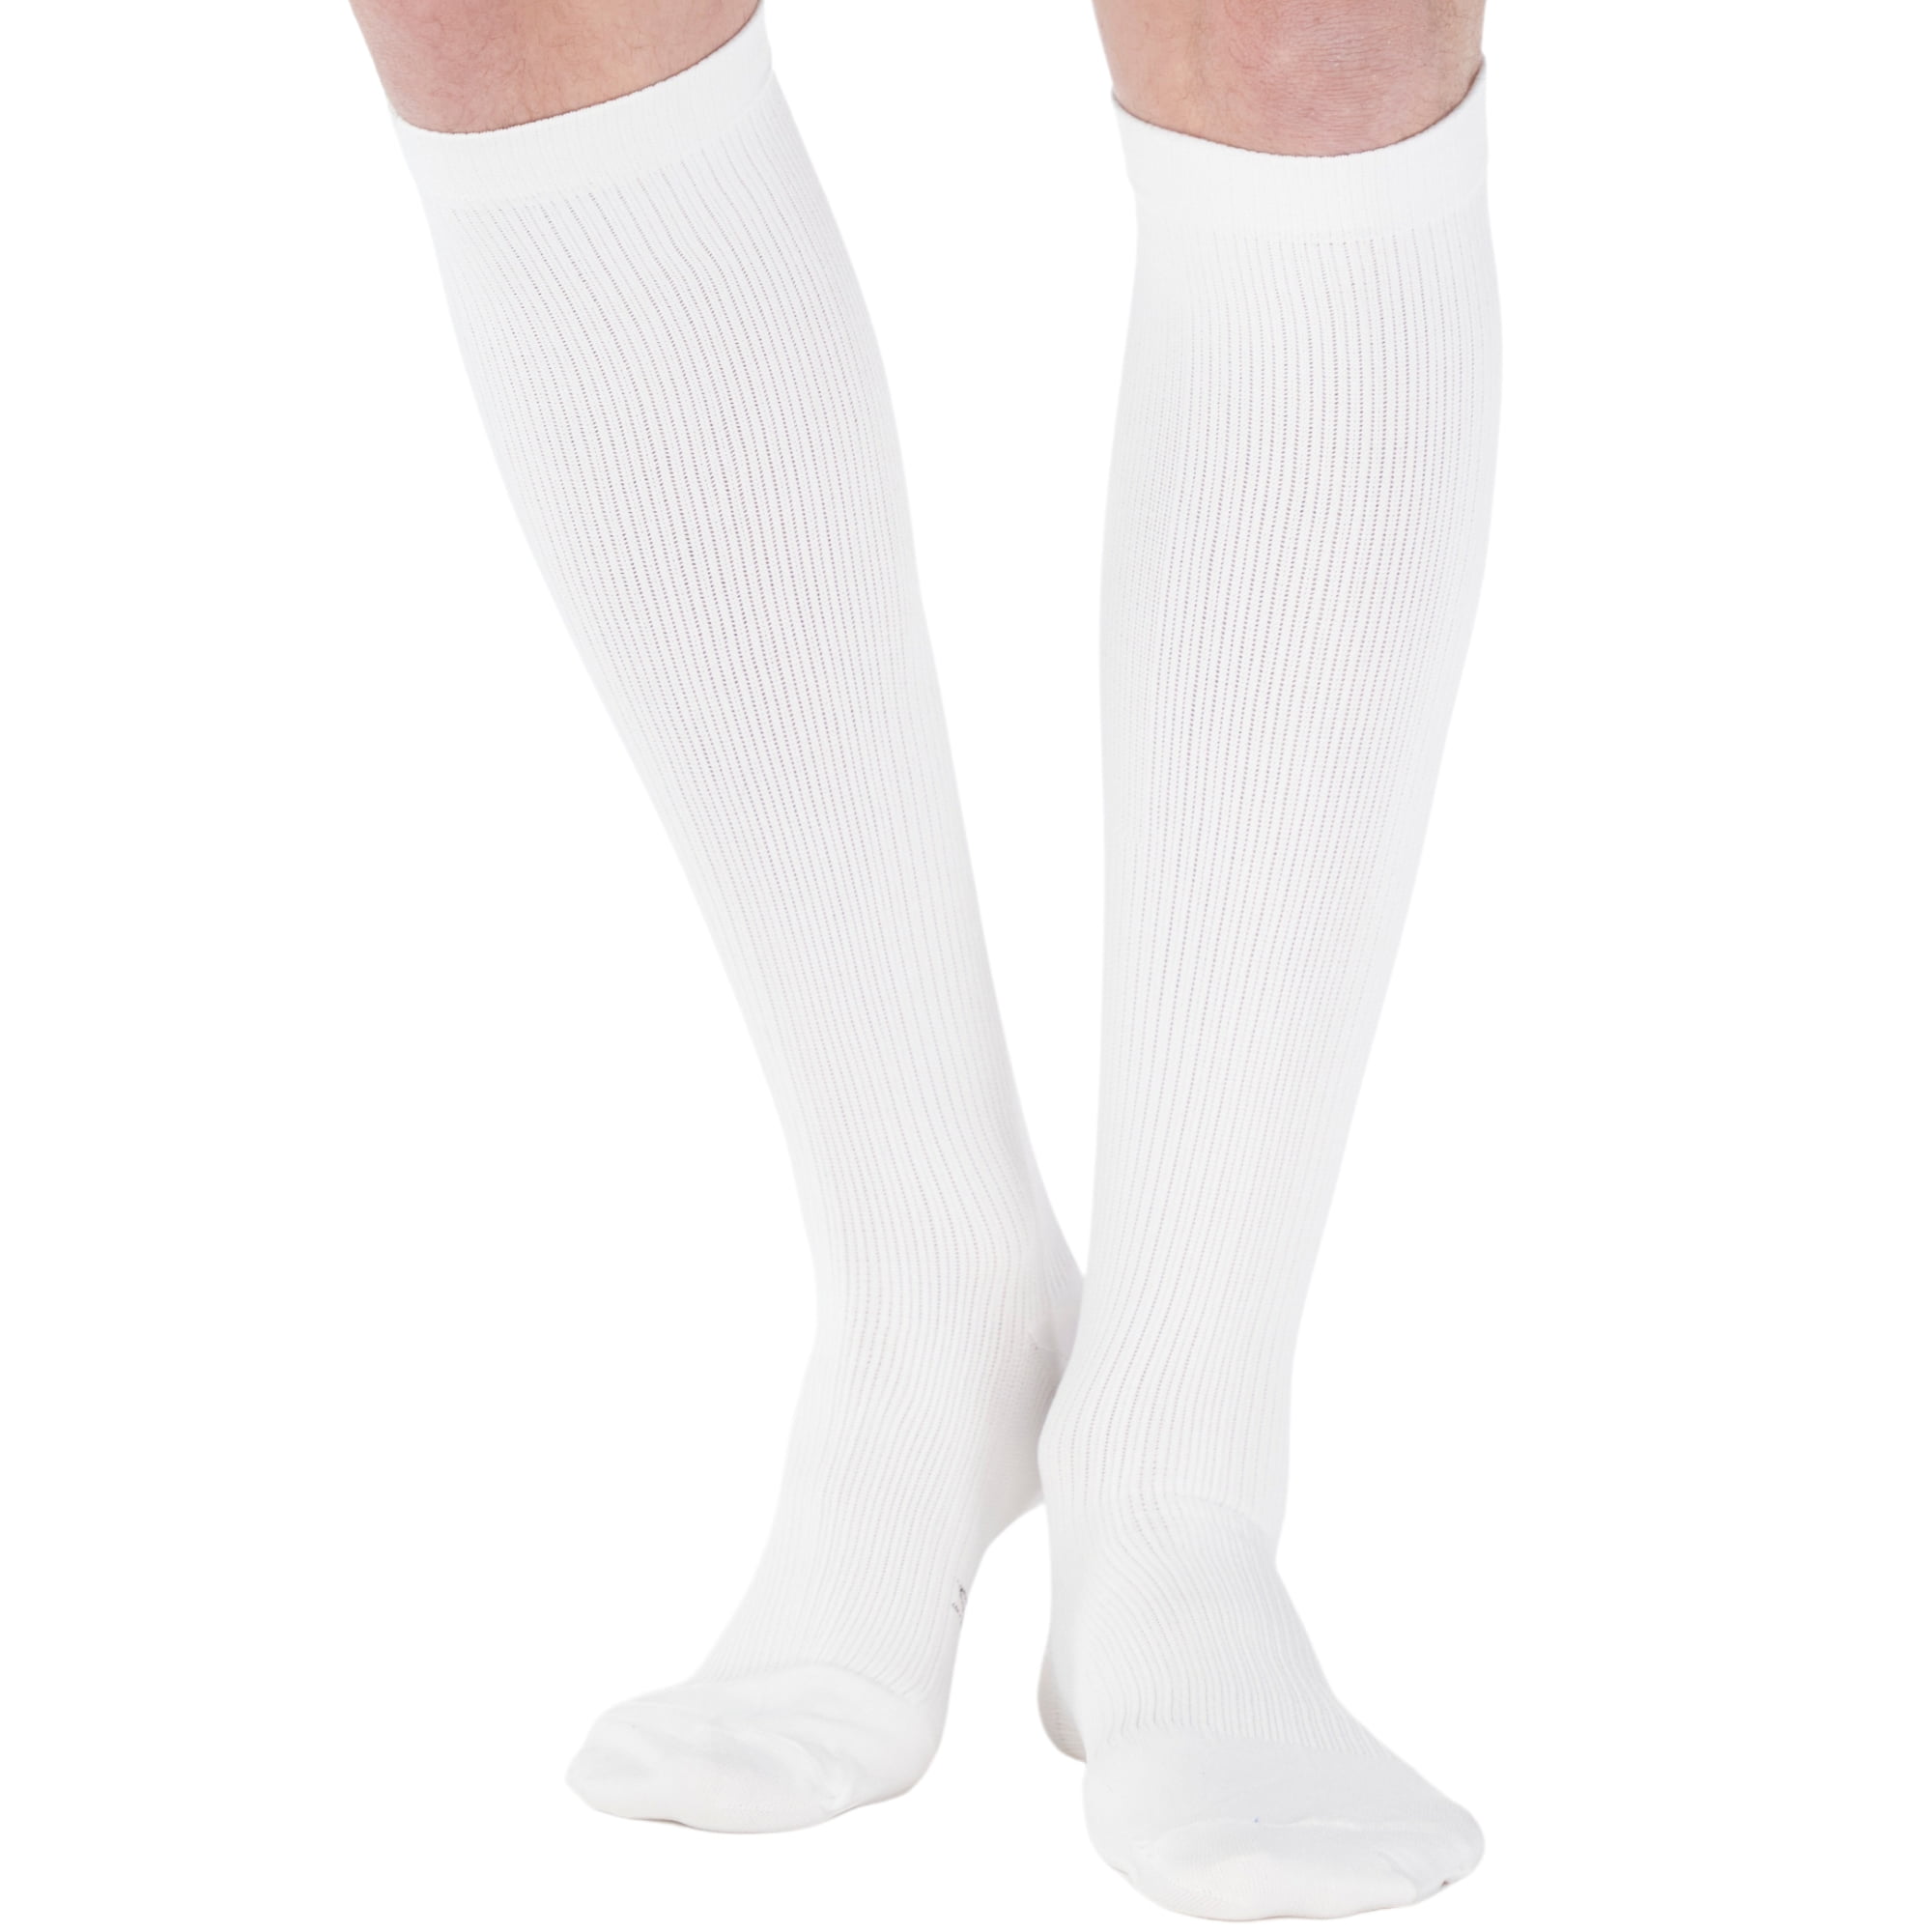 Made in USA - Mens Compression Stockings 20-30 mmHg for Edema - White ...